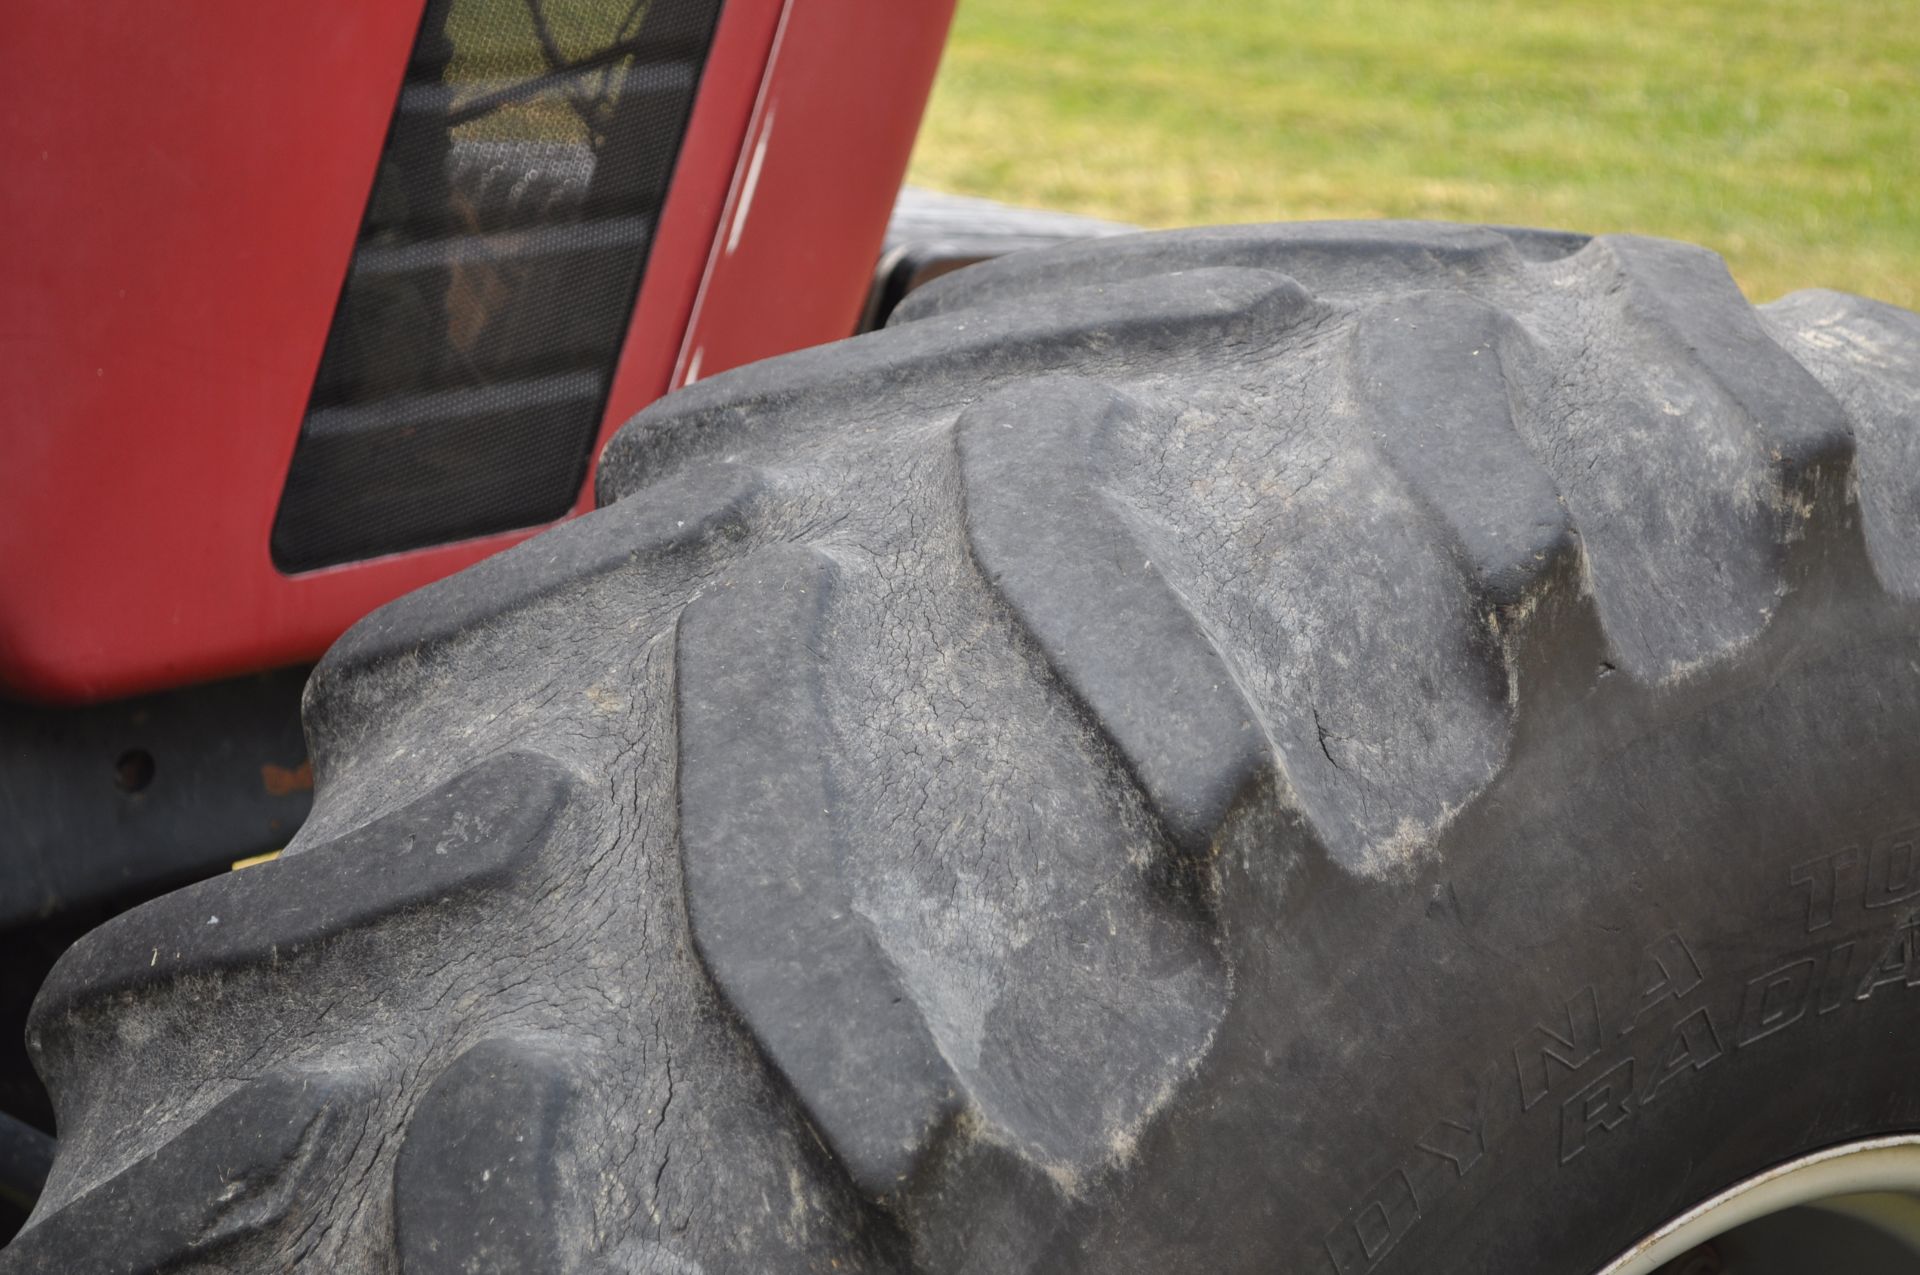 Case IH 7150 tractor, MFWD, C/H/A, 18.4R46 rear duals, 16.9R30 front, 18F 4R powershift - Image 9 of 29